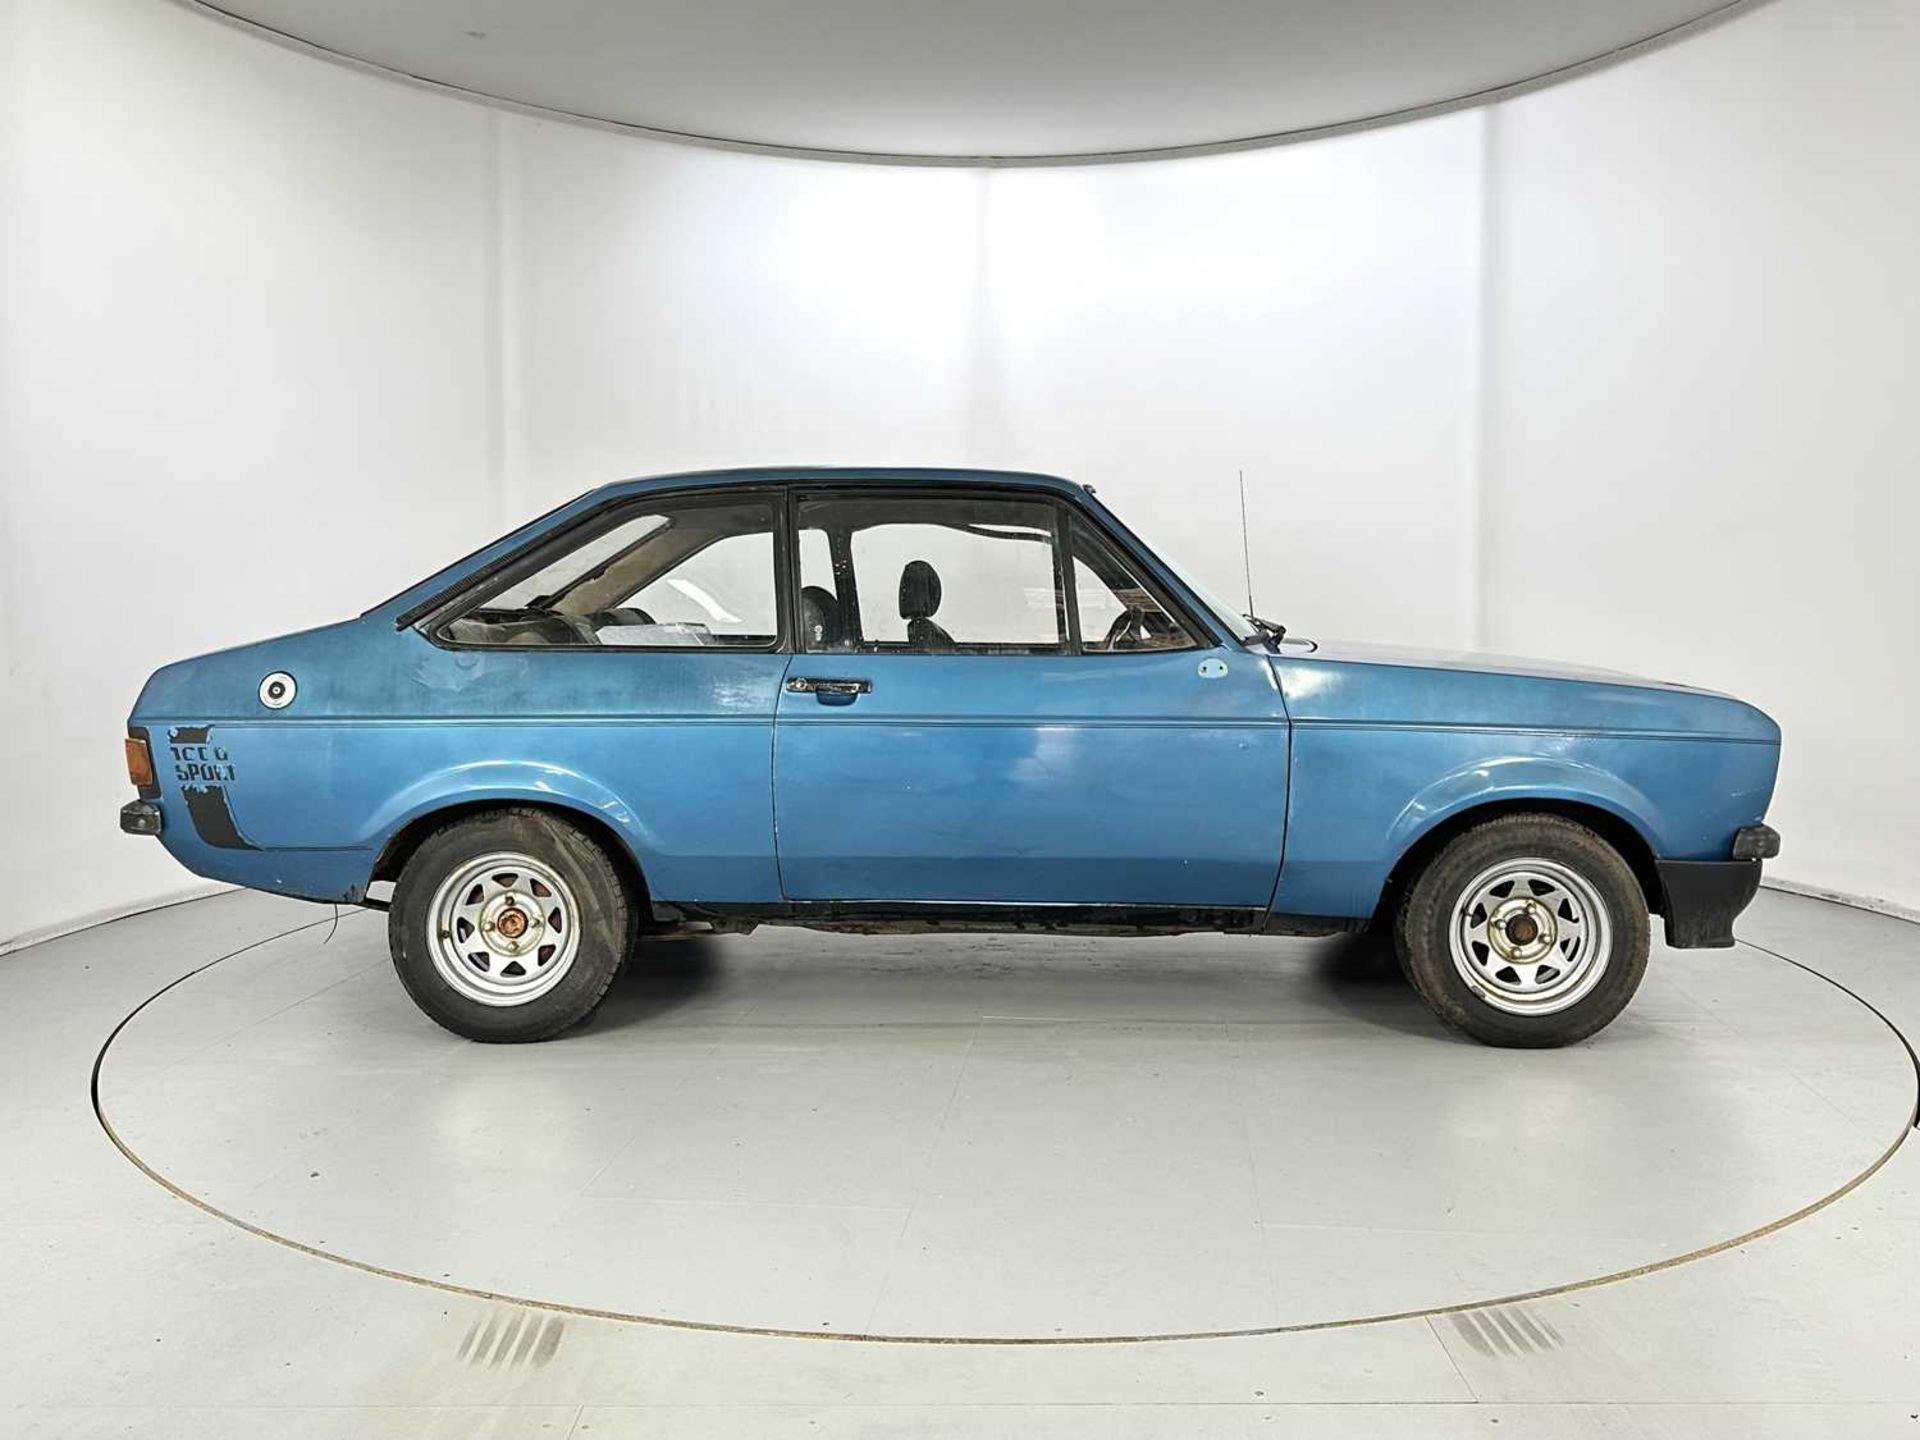 1979 Ford Escort 1600 Sport - Image 11 of 22